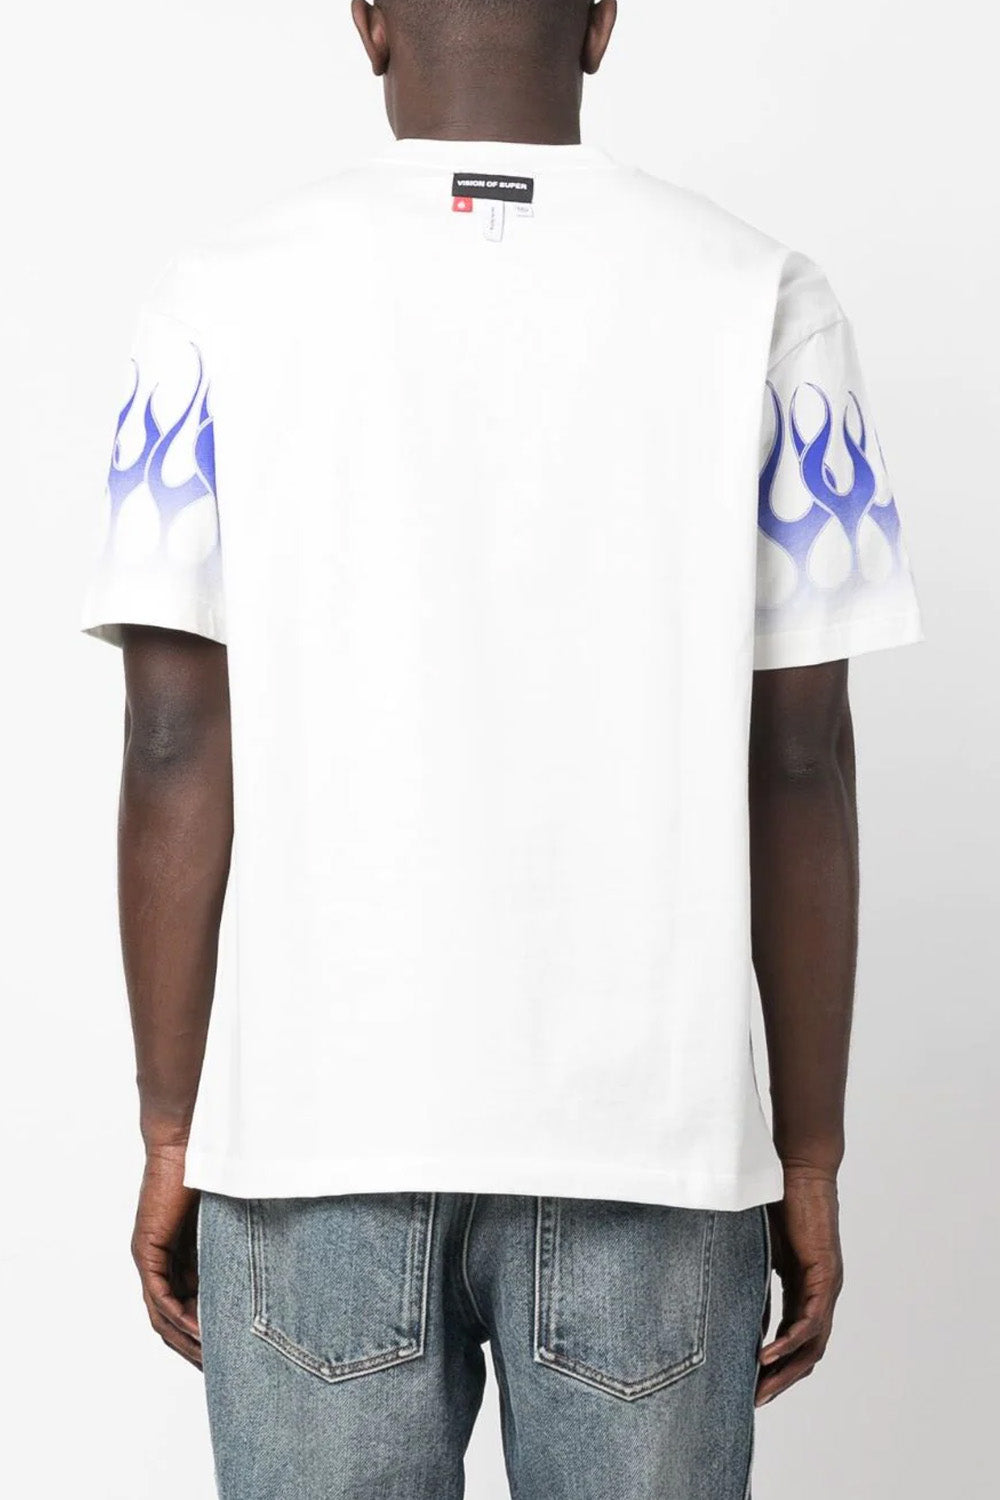 VISION OF SUPER OFF WHITE TSHIRT WITH BLUE FLAMES